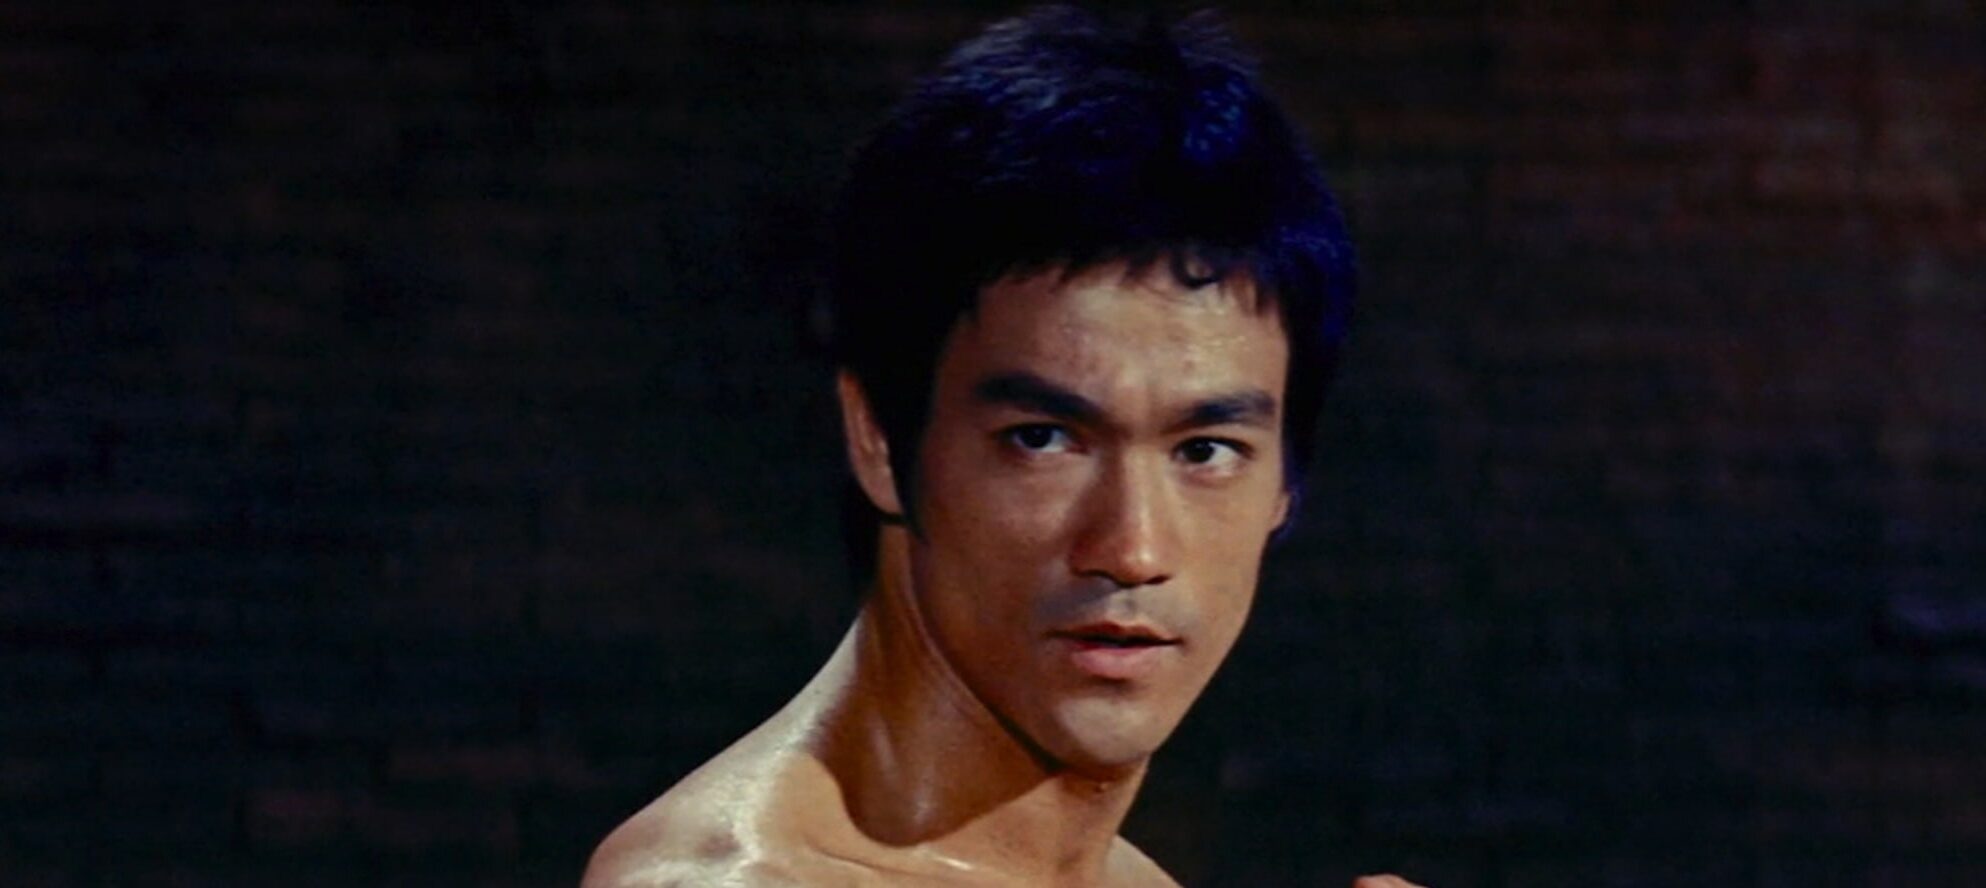 When Bruce Lee made an iconic appearance on 'Batman